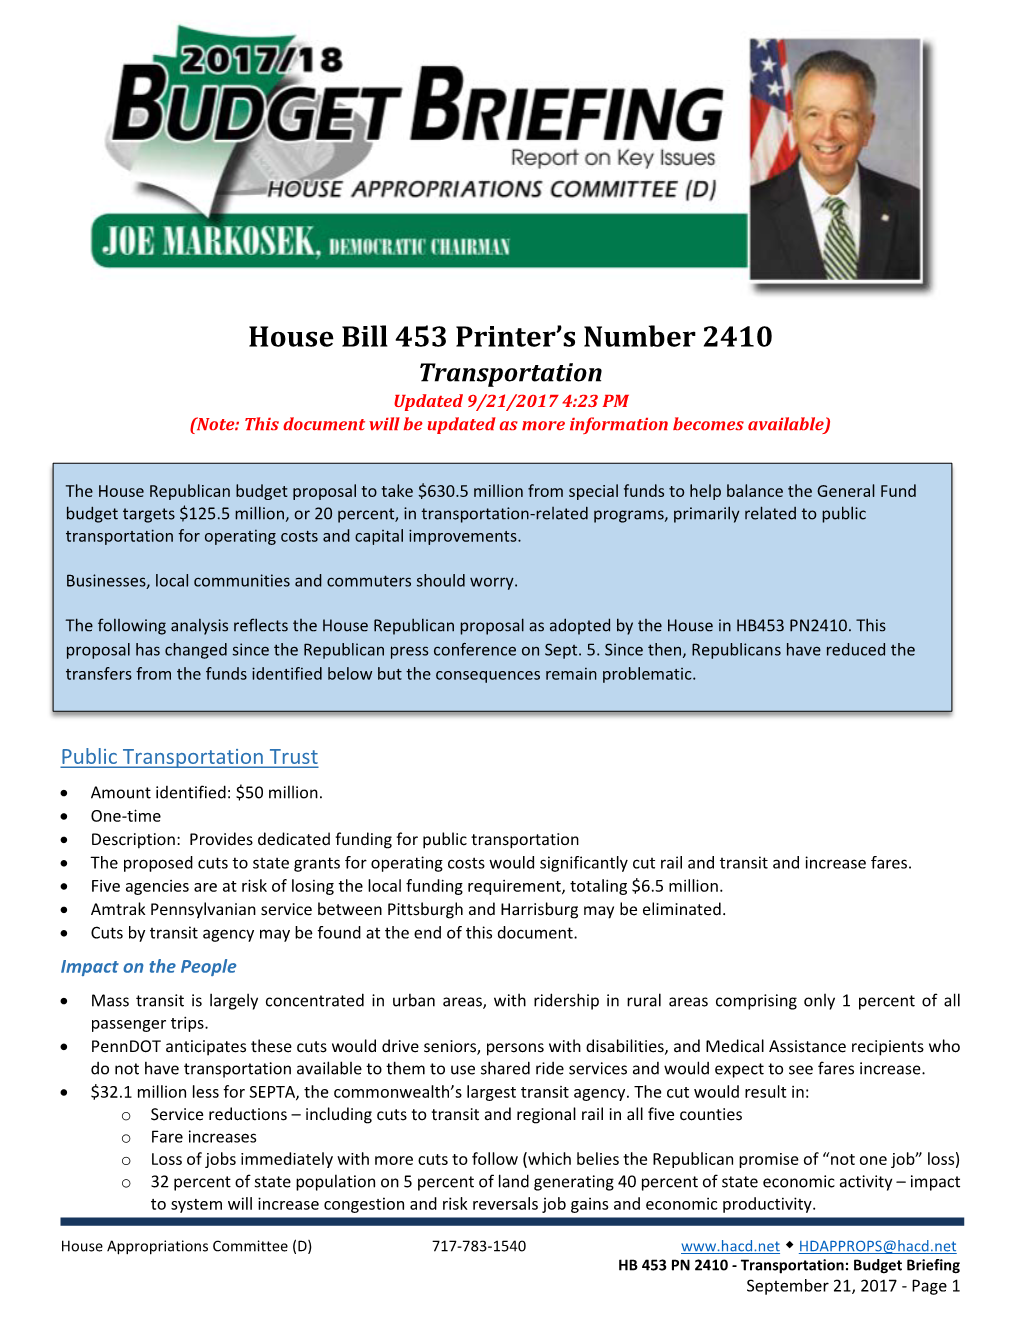 House Bill 453 Printer's Number 2410